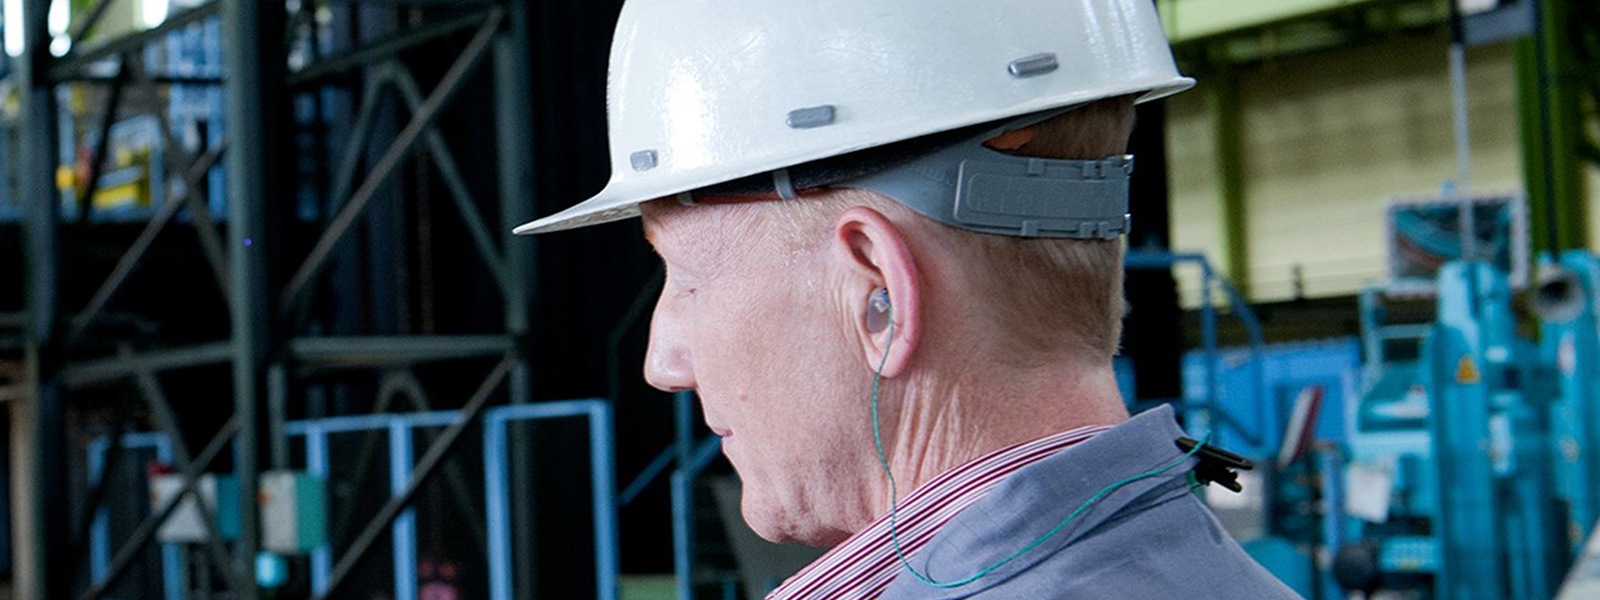 A worker wearing a protective helmet and earplugs.